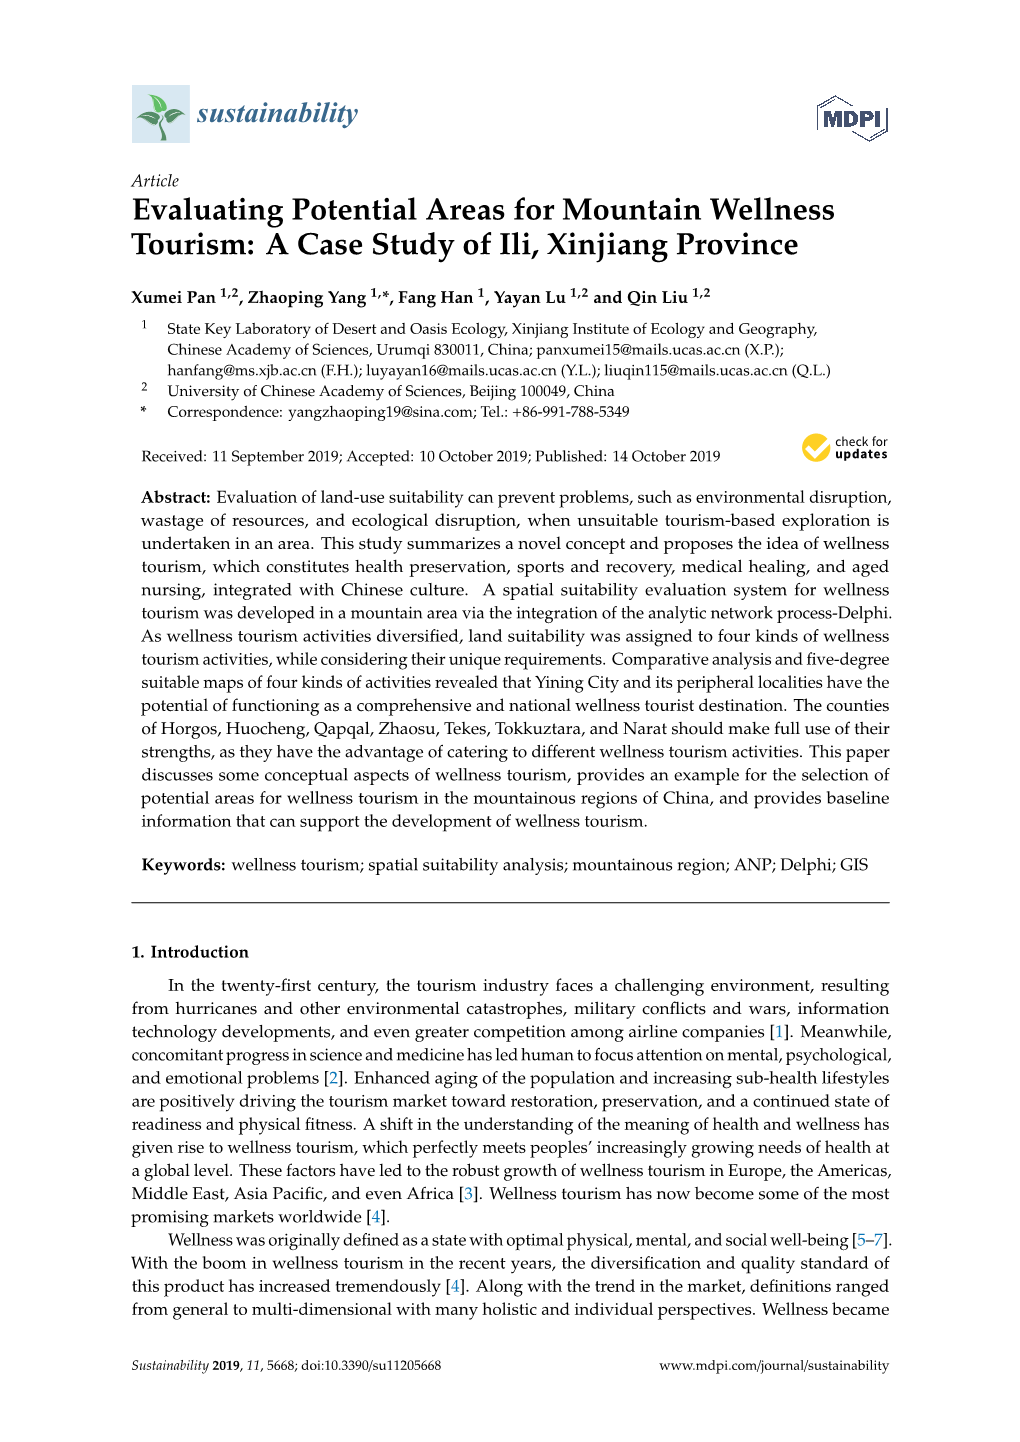 Evaluating Potential Areas for Mountain Wellness Tourism: a Case Study of Ili, Xinjiang Province